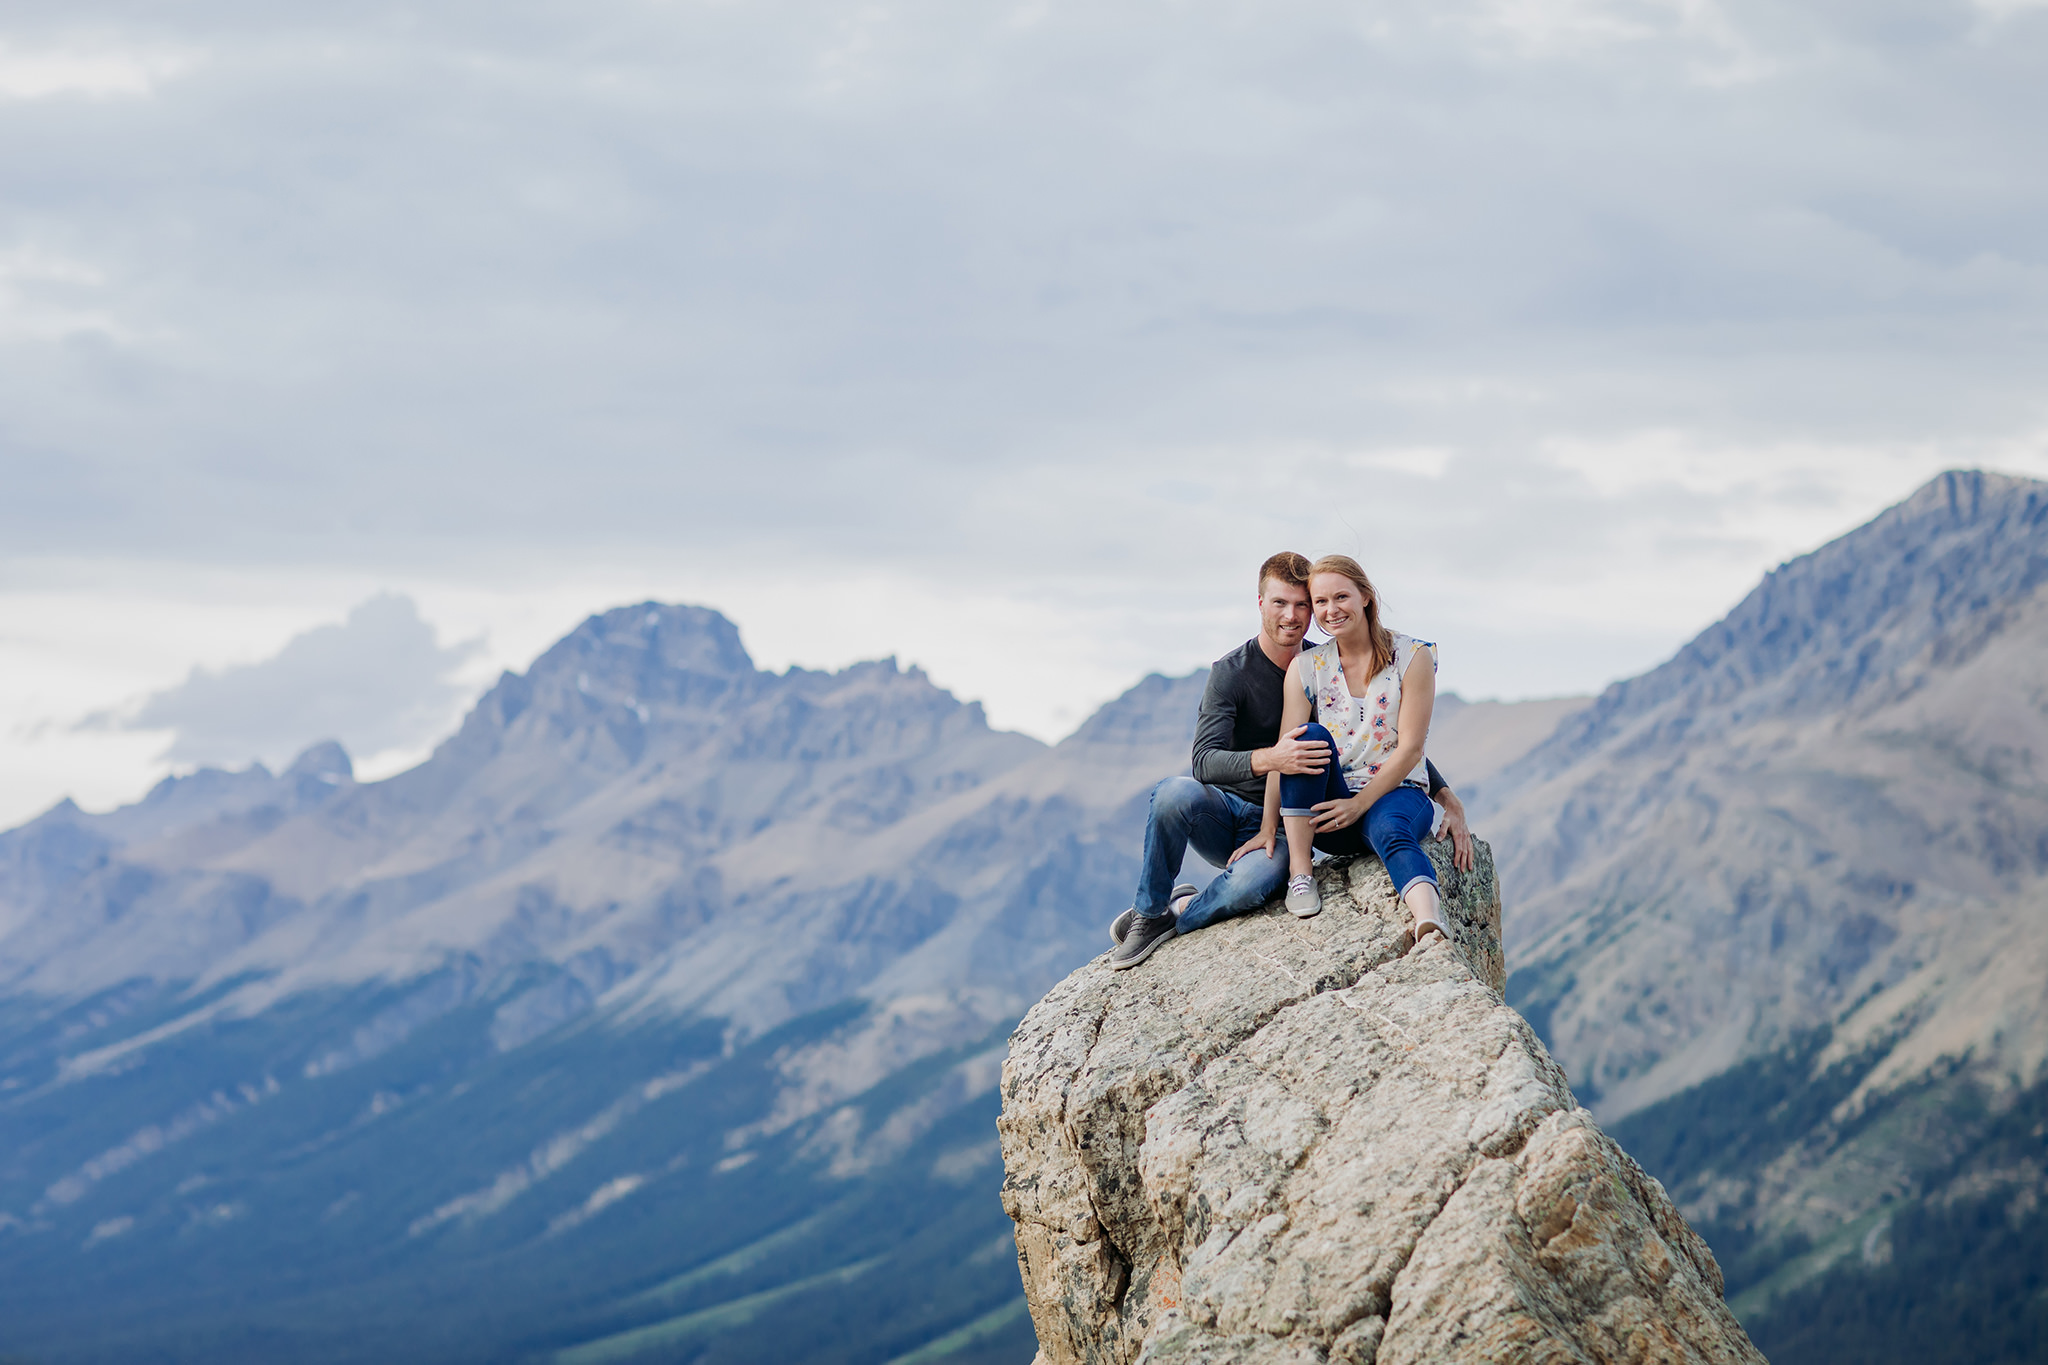 Adventurous Peyto Lake casual engagement photography session at Bow Summit along Icefields Parkway in Banff National Park photographed by local engagement & elopement photographer ENV Photography